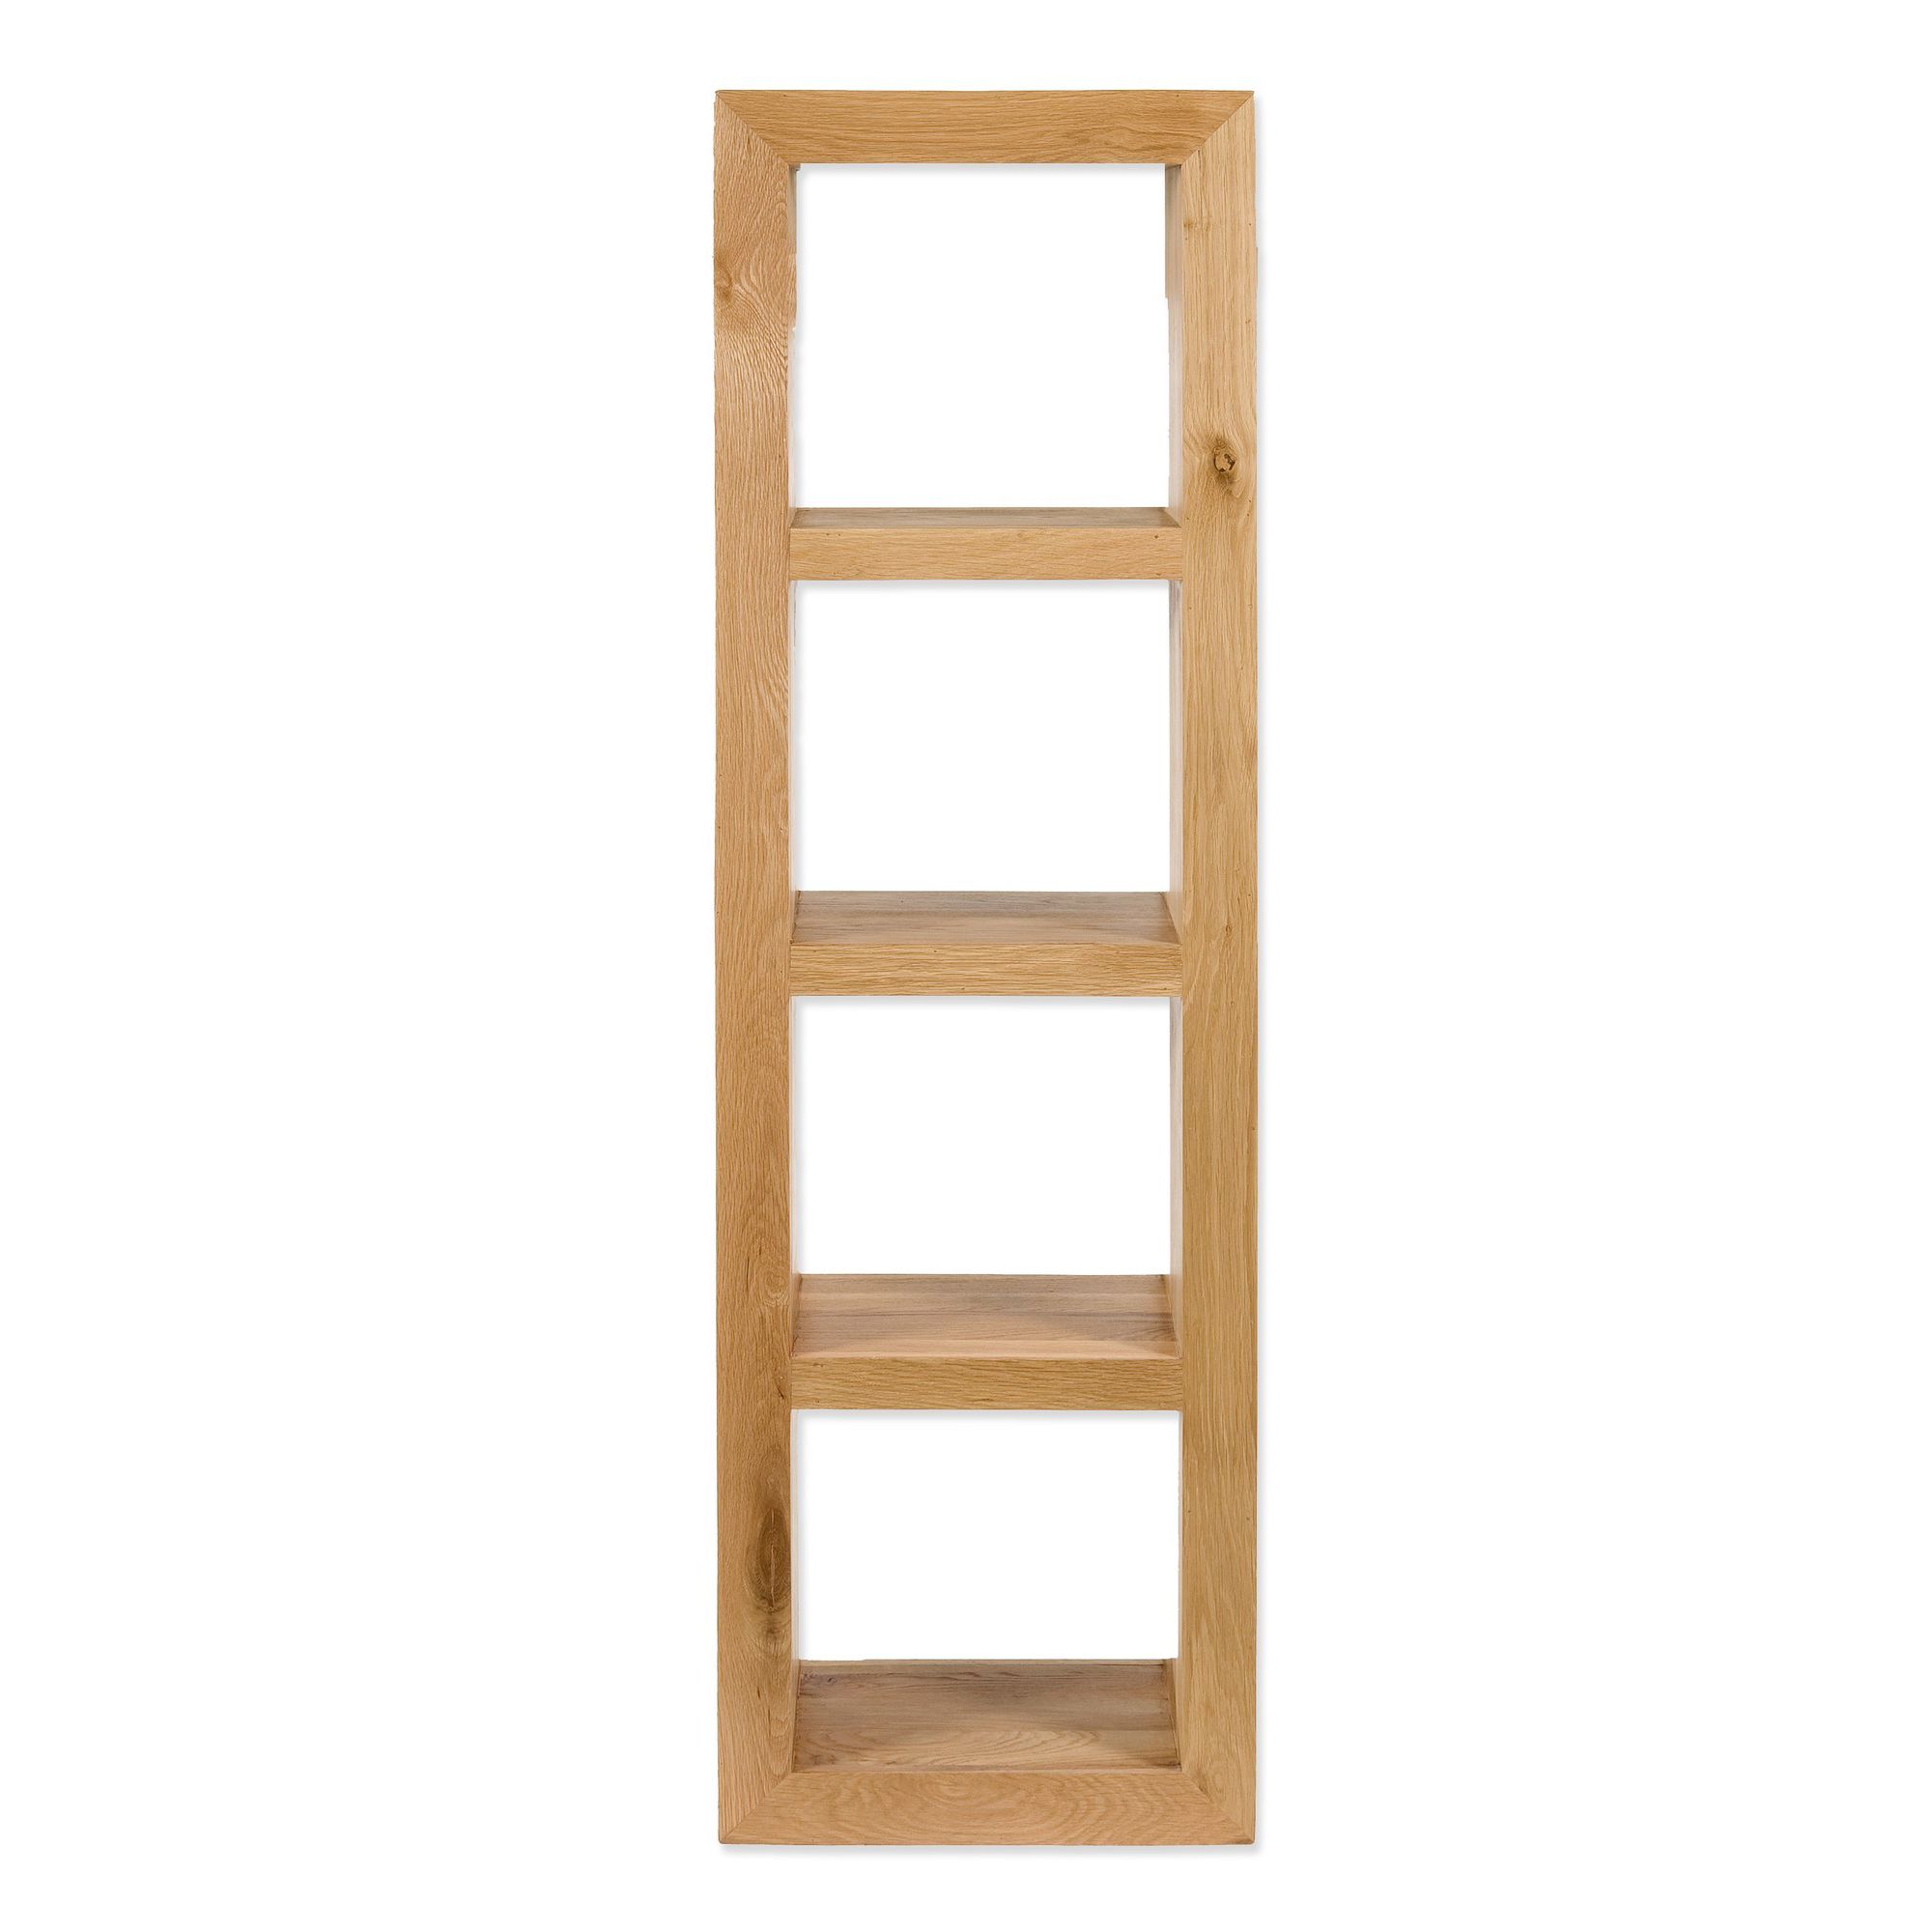 Elements Ashgrove Four Hole Vertical Shelving Unit in Natural Lacquer at Tescos Direct